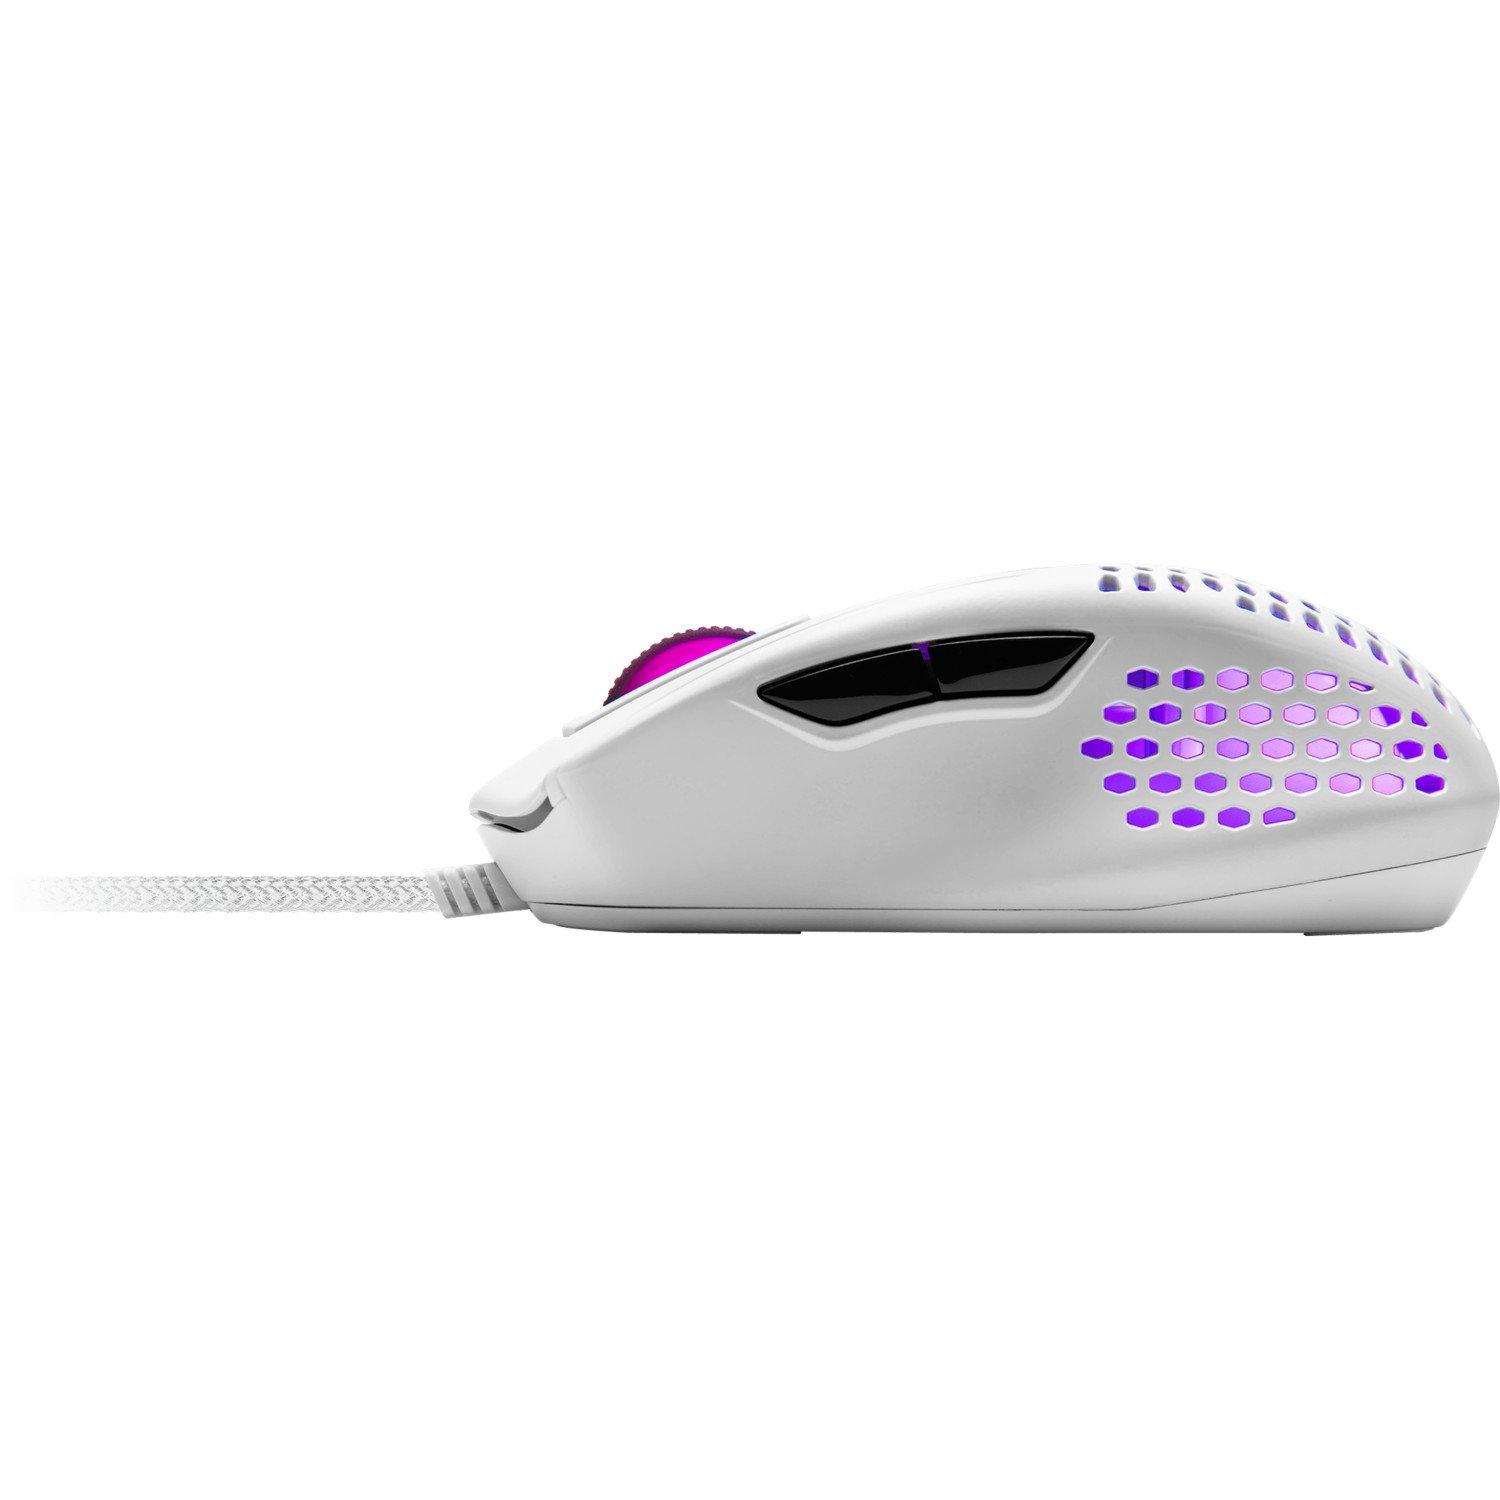 Cooler Master MM720 Gaming Mouse